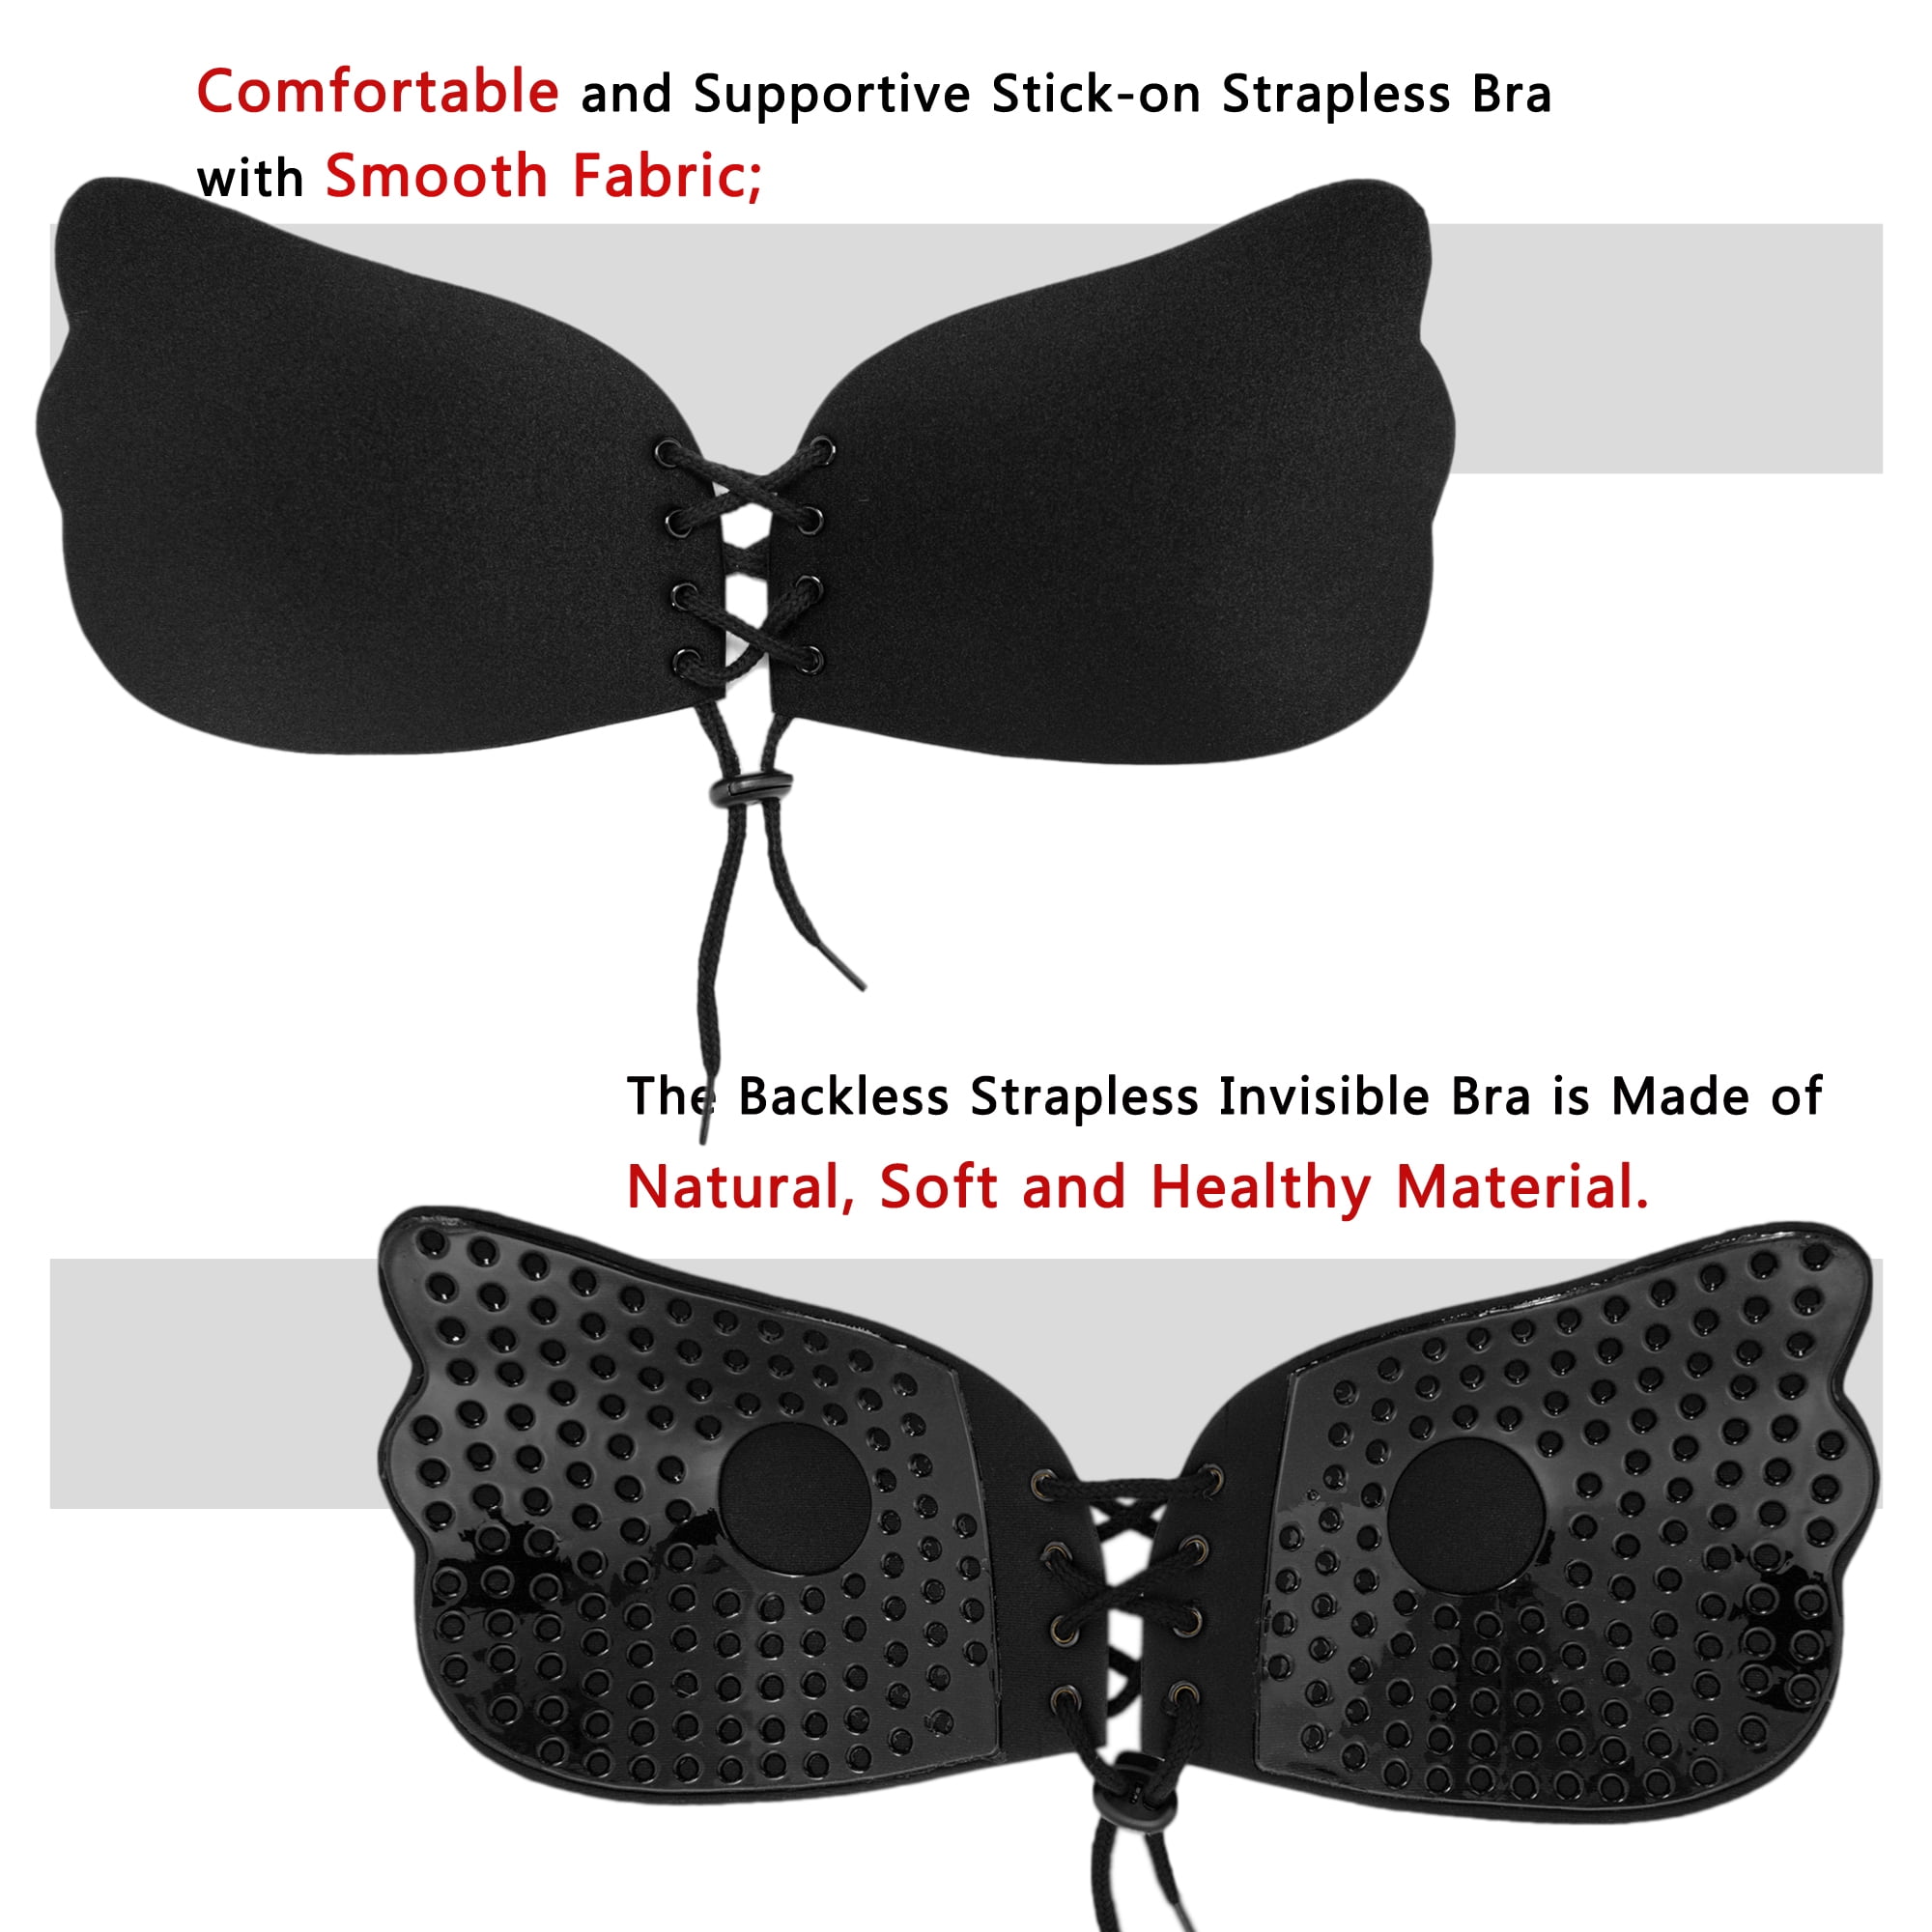 Bras Sets 2pack Backless Front Self Adhesive Tape Bra Beautiful Frontless  Penty Design From Happyjany, $21.36